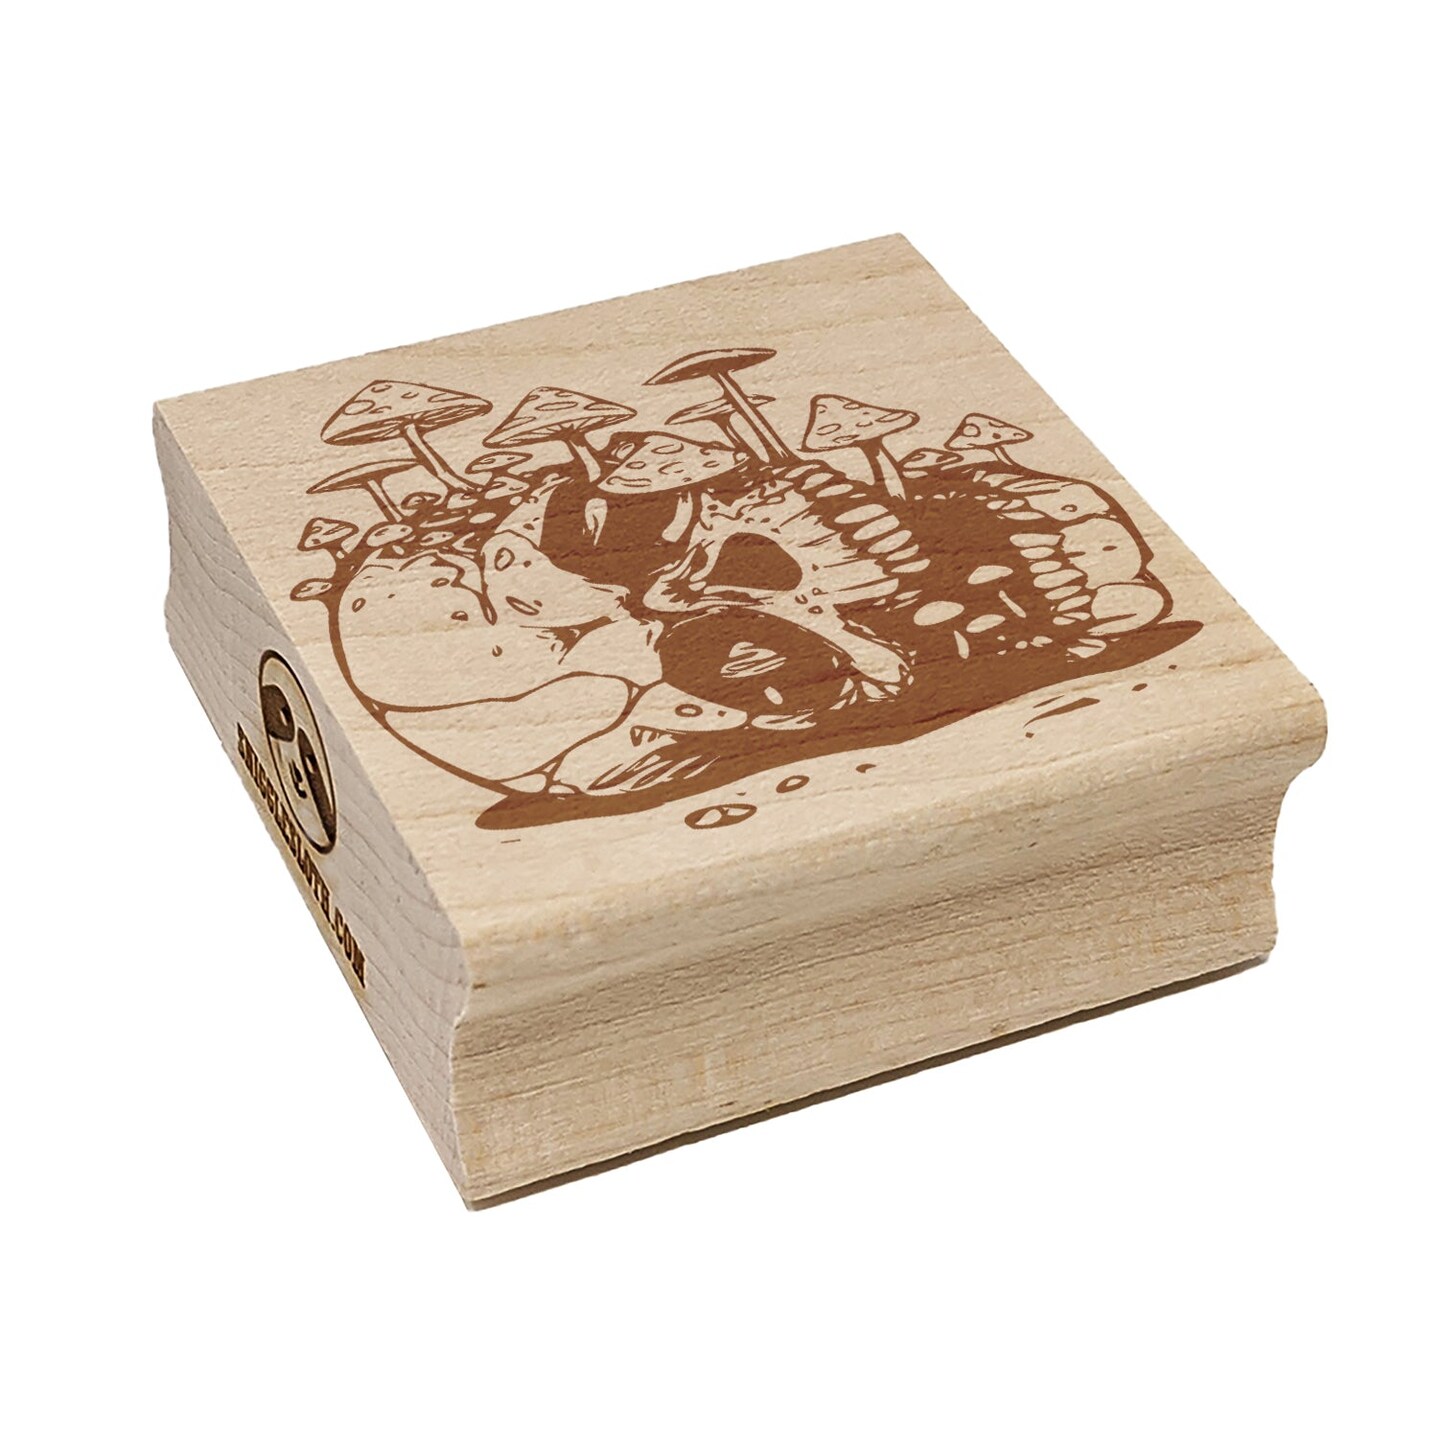 Skull Mushrooms Fungus Growing Out of It Square Rubber Stamp for Stamping Crafting